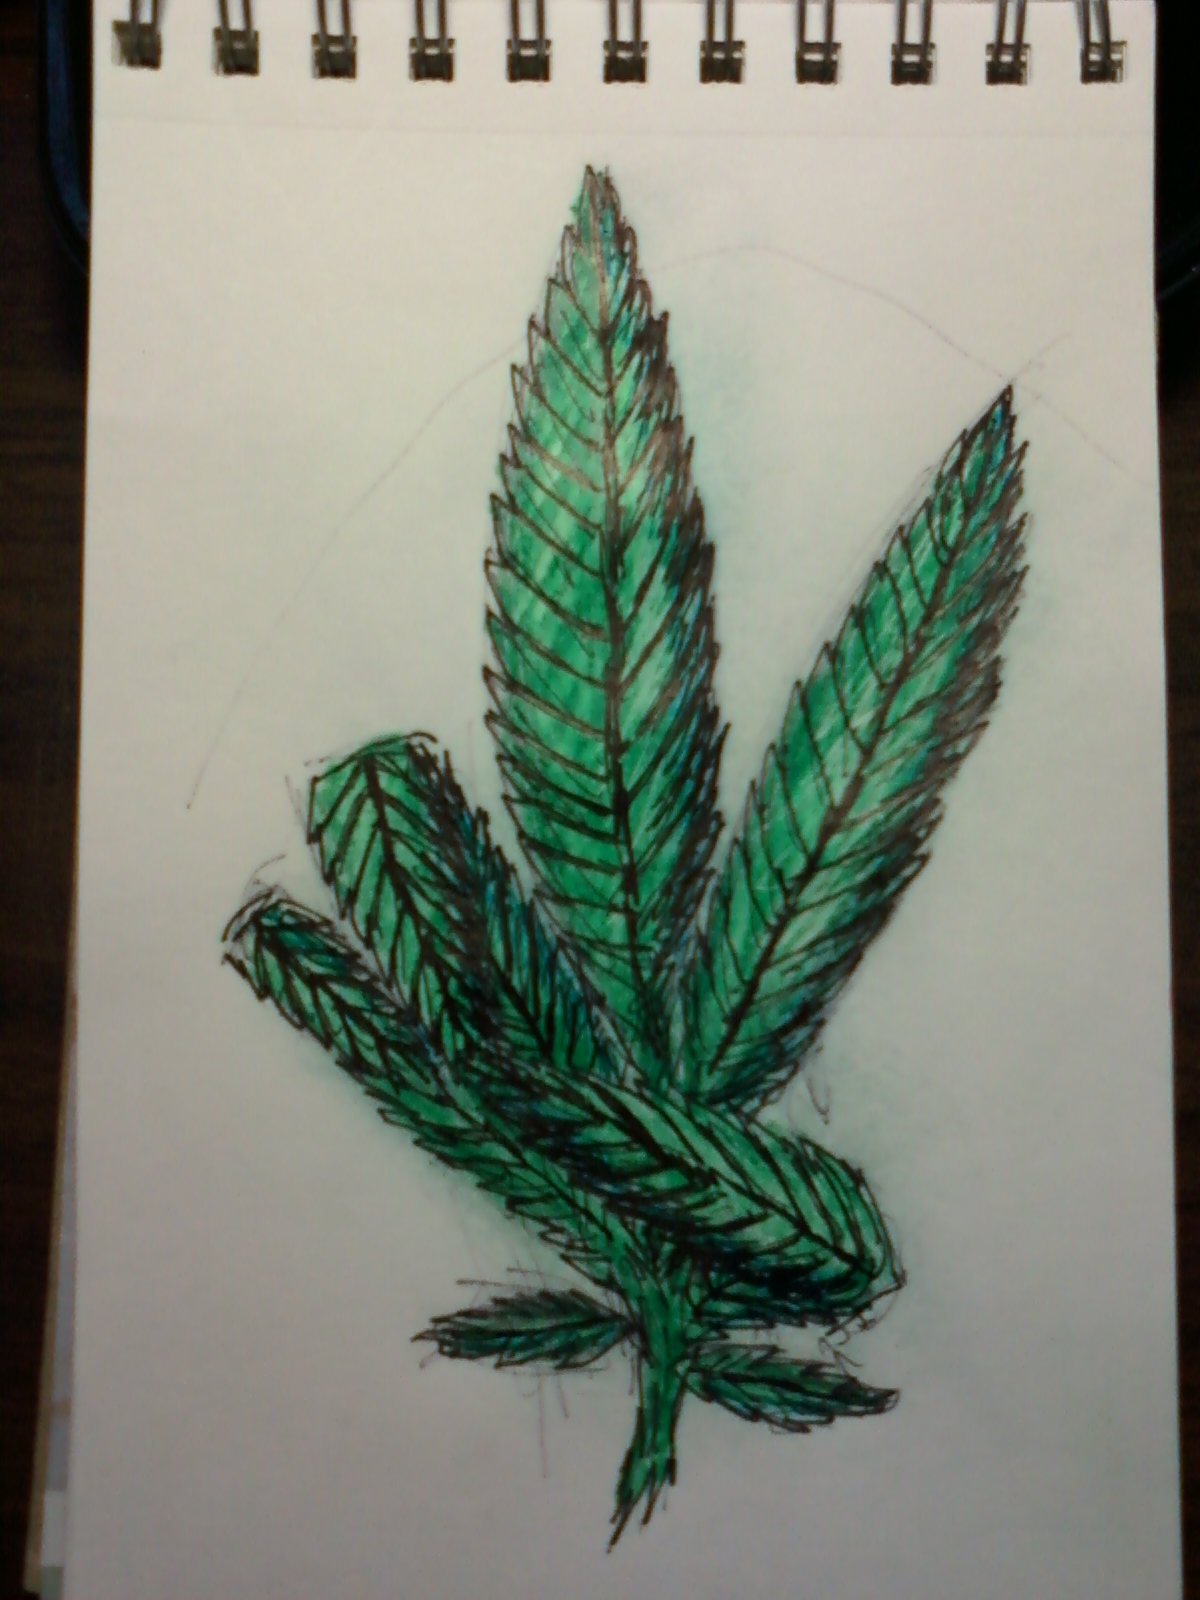 CannabisGraphicImagesGallery